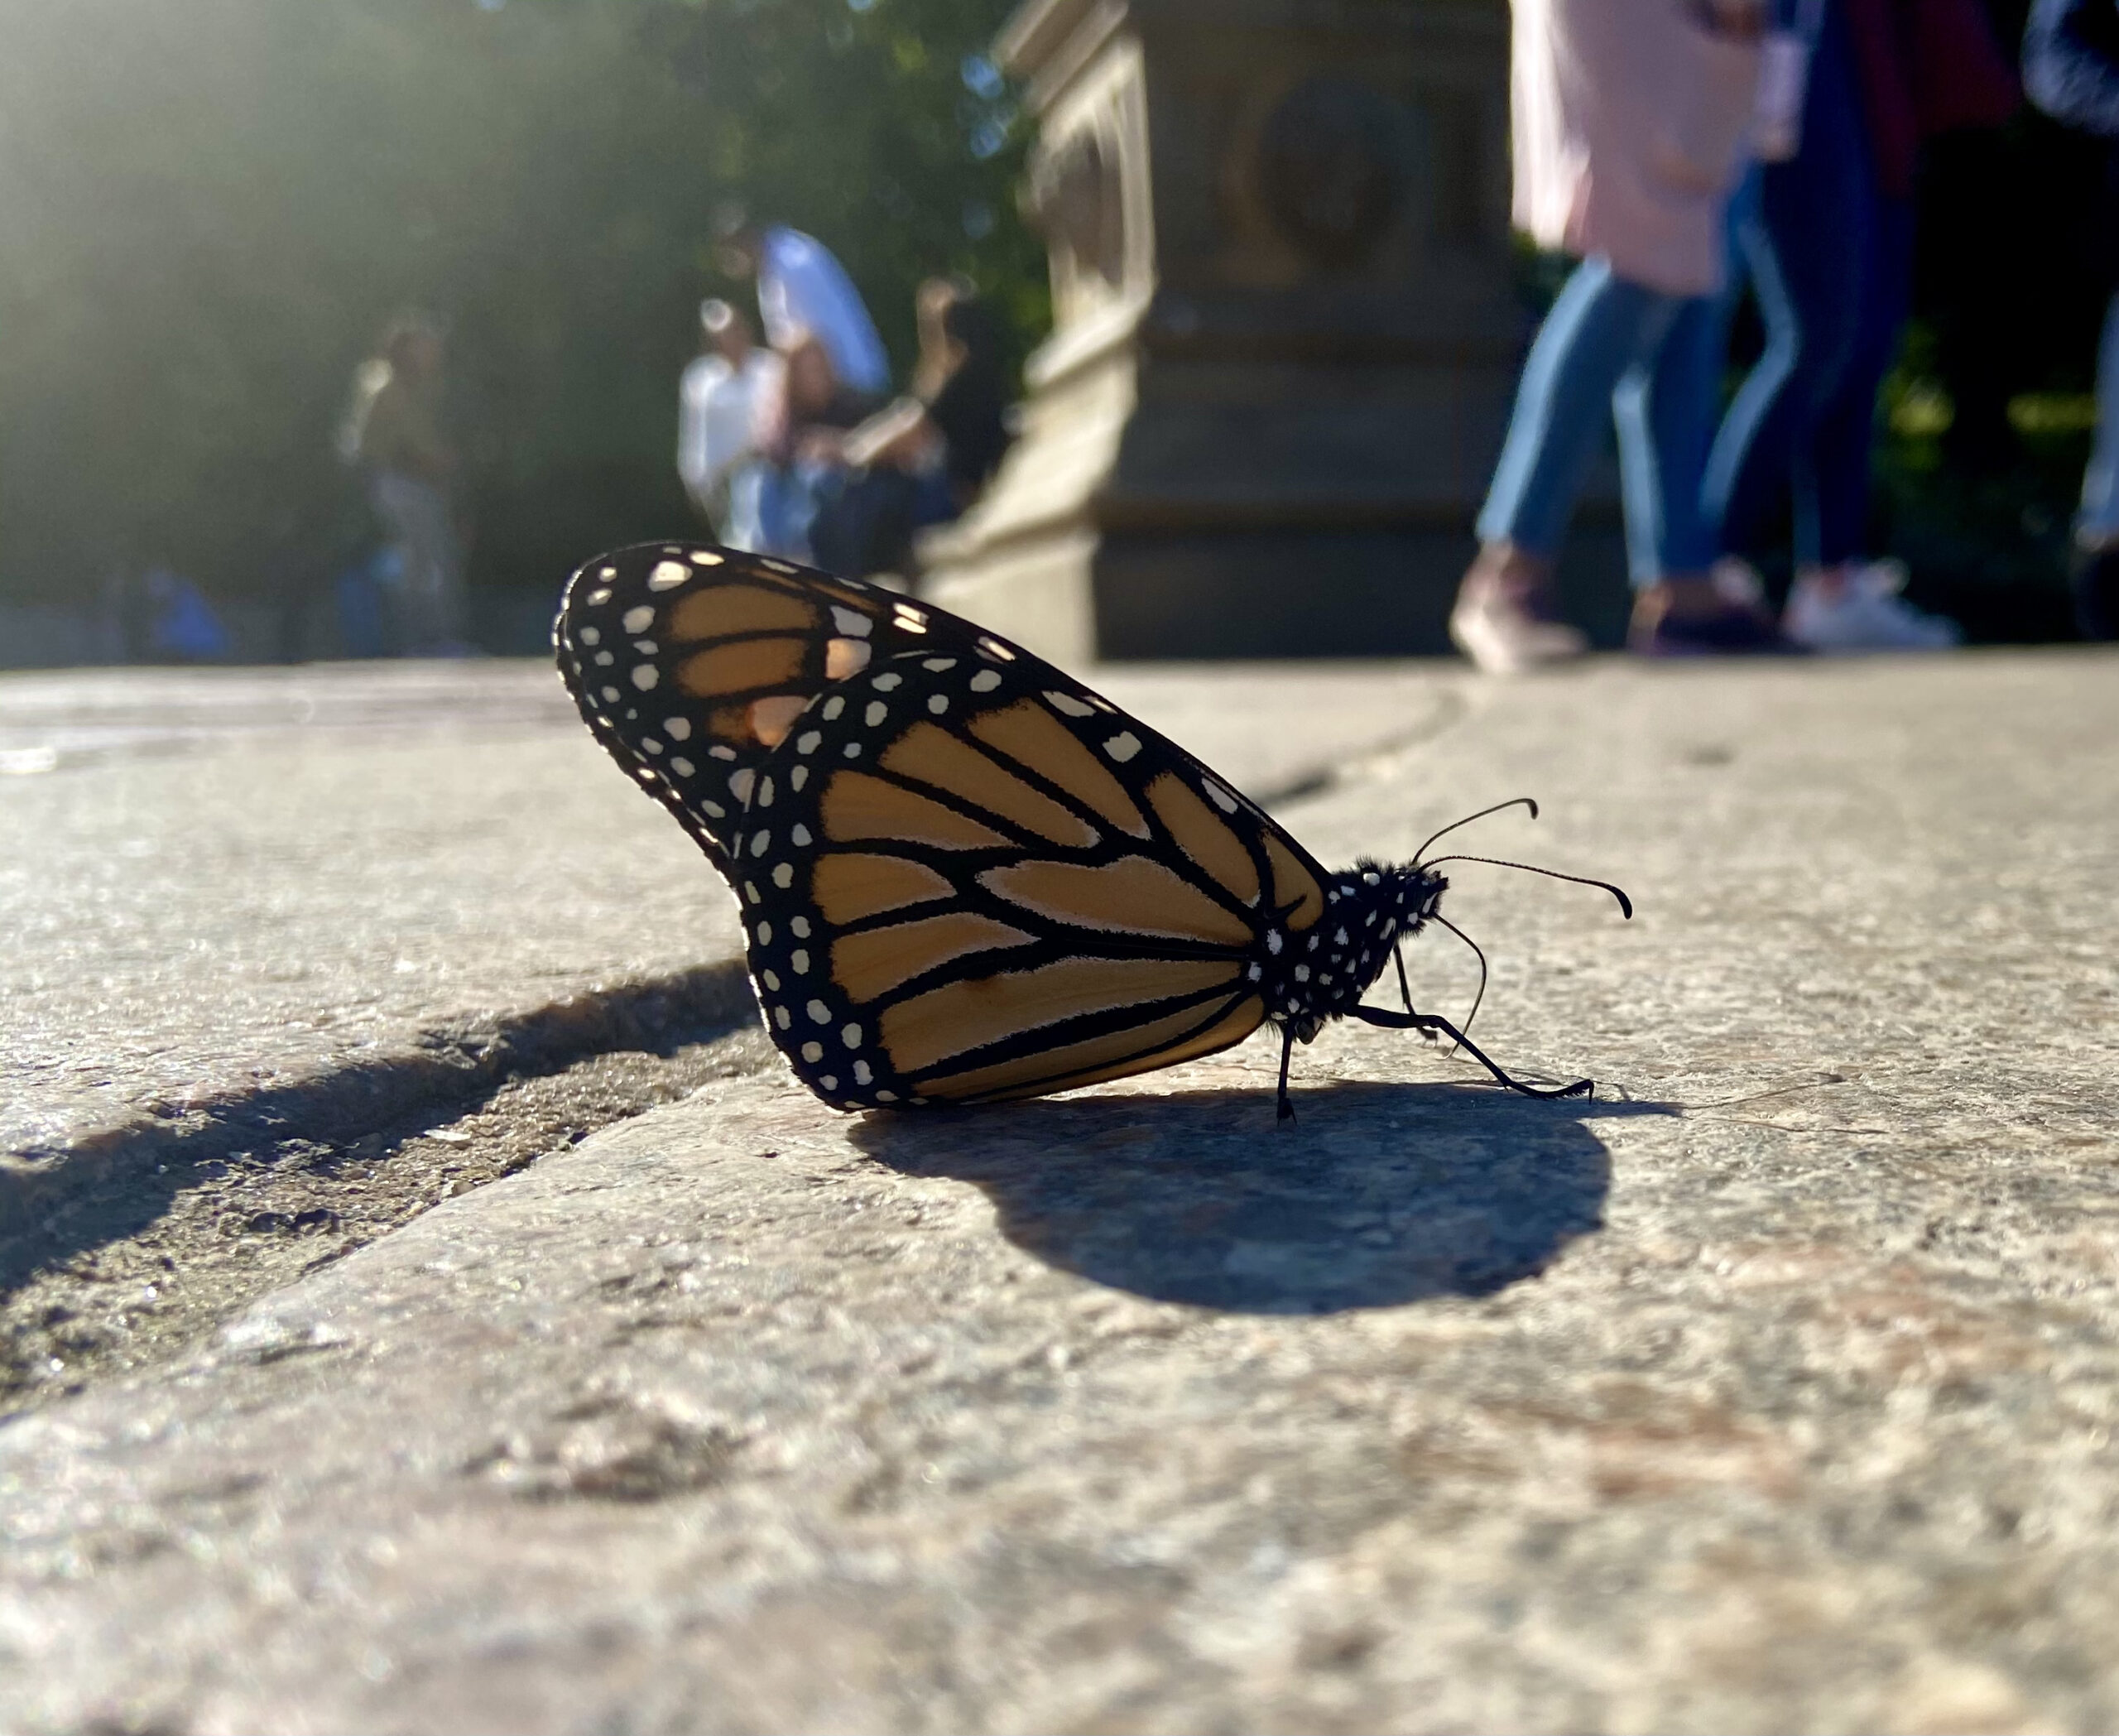 Monarch Butterflies Bring Together Conservation and Culture